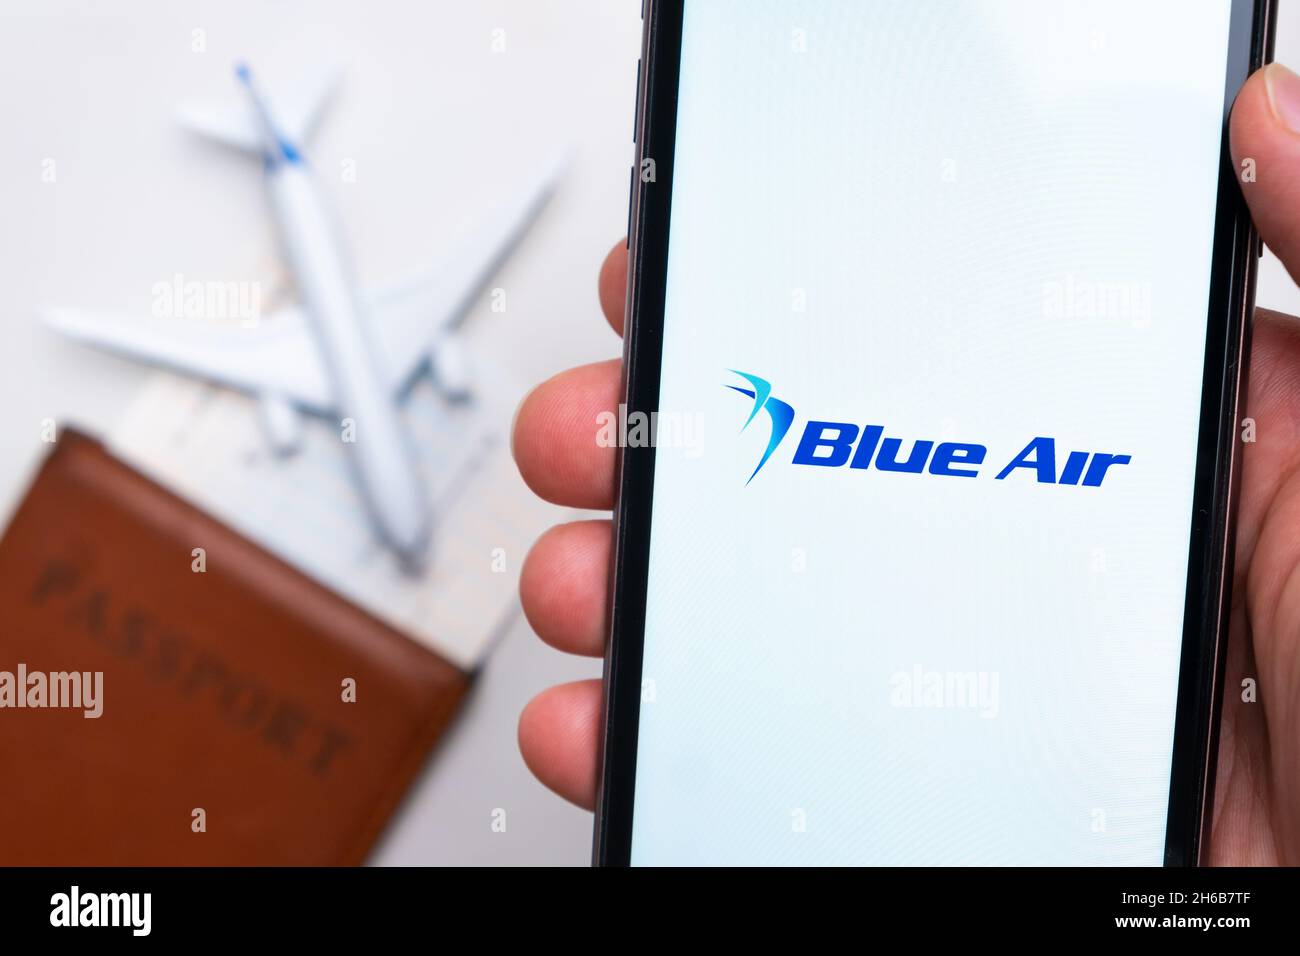 Blue Air airlines company app or logo displayed on a mobile phone with passport, boarding pass, and plane on the background, September 2021, San Francisco, USA.  Stock Photo